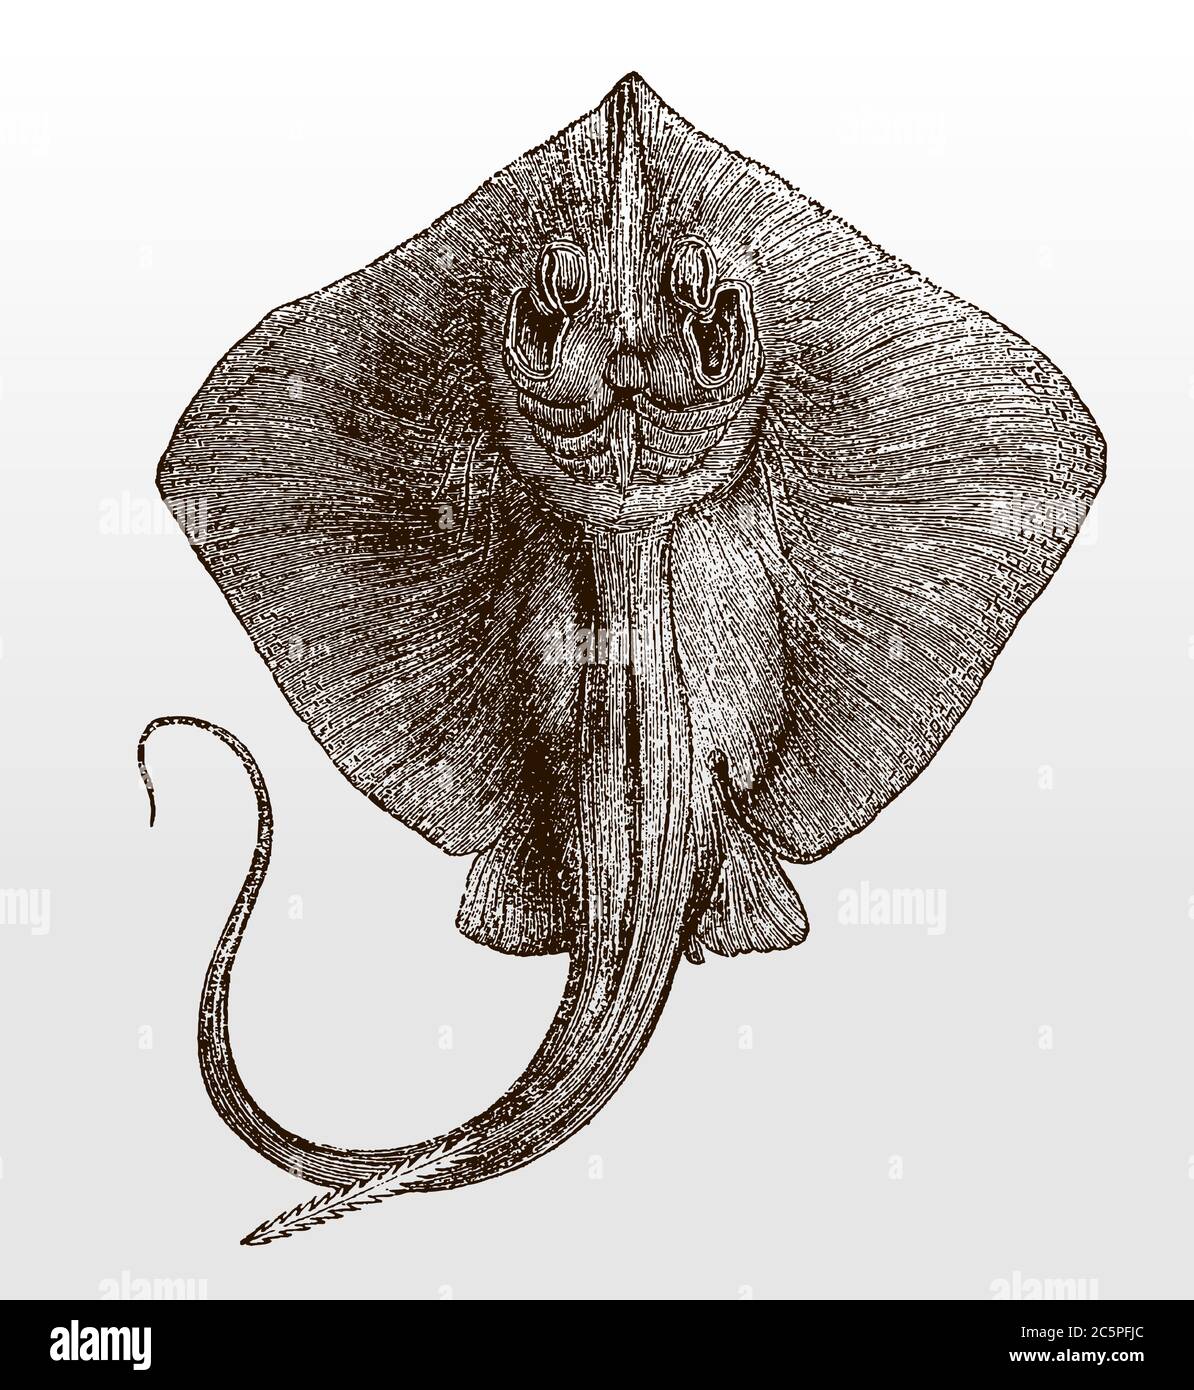 Common stingray, dasyatis pastinaca in underside view after an antique illustration from the 19th century Stock Vector